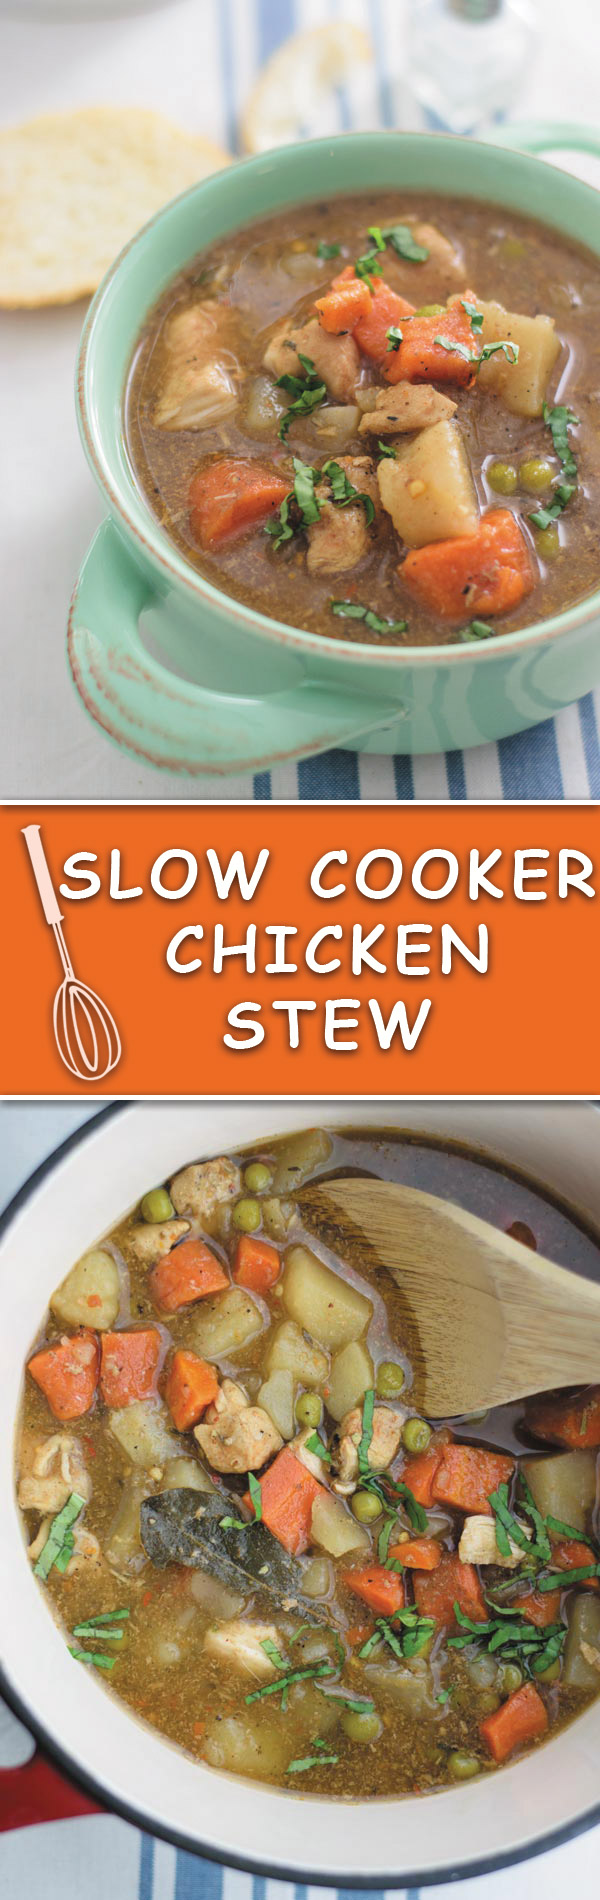 Slow Cooker Chicken Stew - easy delicious slow cooker CHICKEN STEW. Just throw everything in slow cooker & come home to a delicious meal!